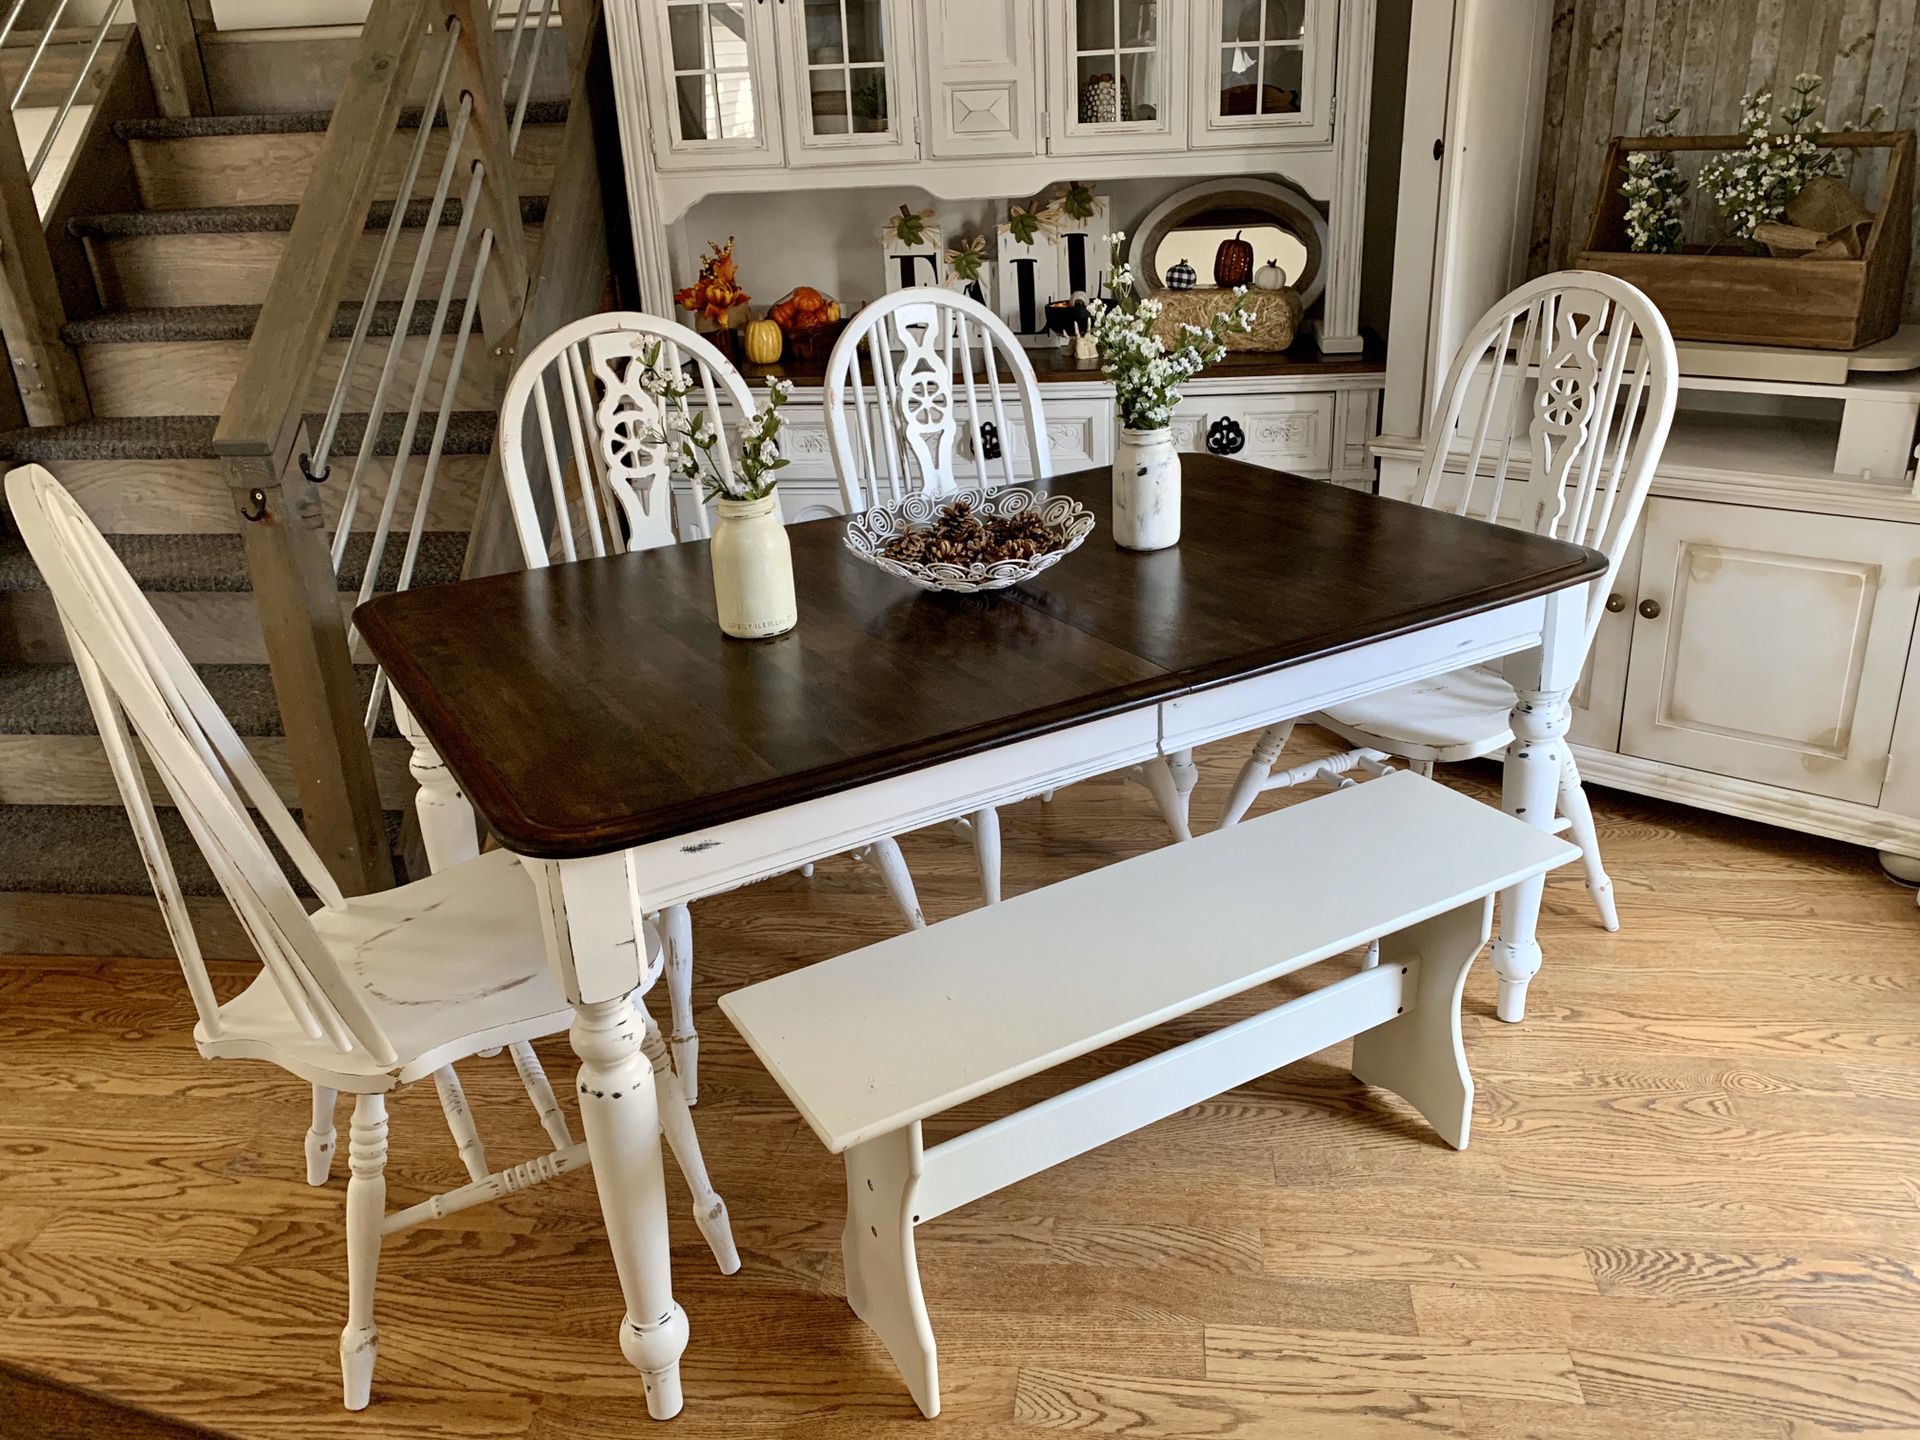 Shabby kitchen / dining table , 4 chairs and nook bench